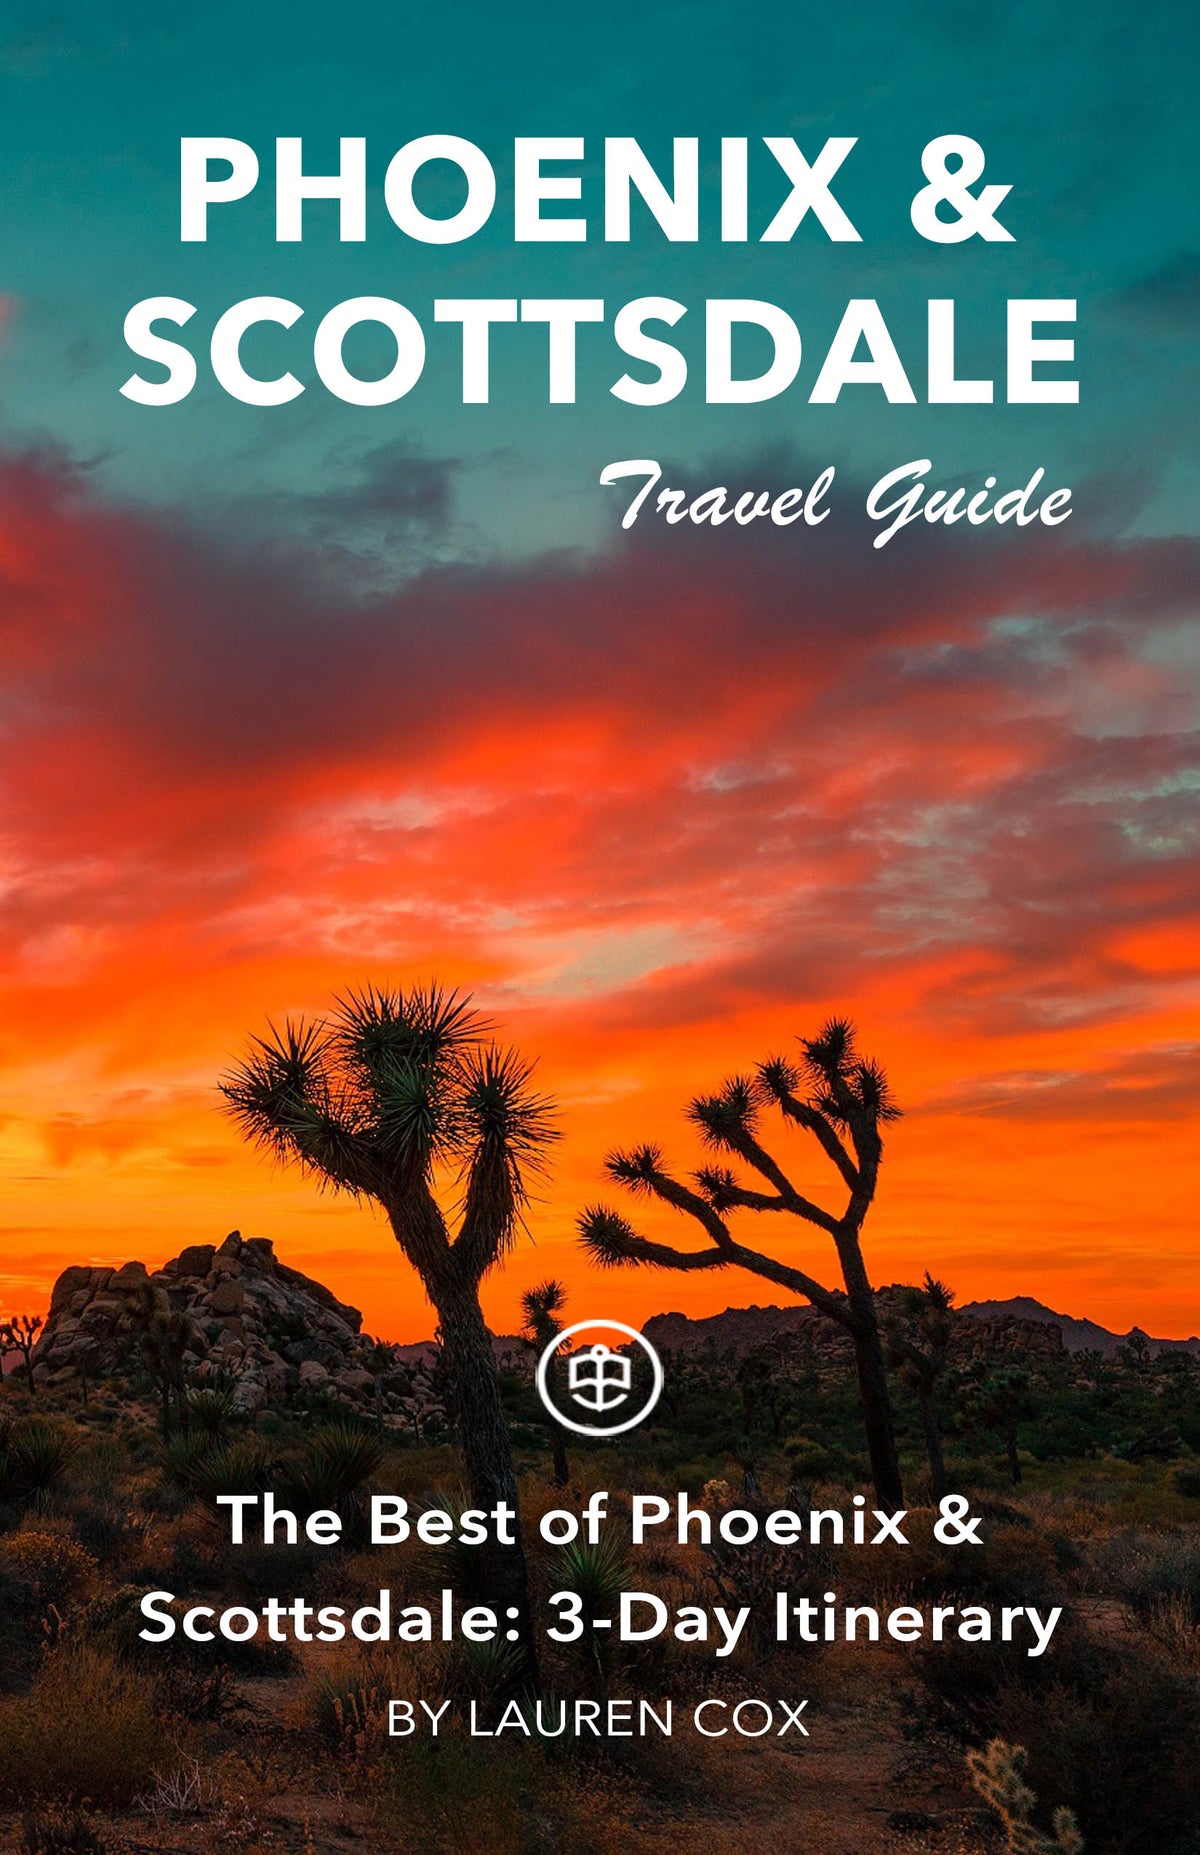 The Best of Phoenix & Scottsdale: 3-Day Itinerary